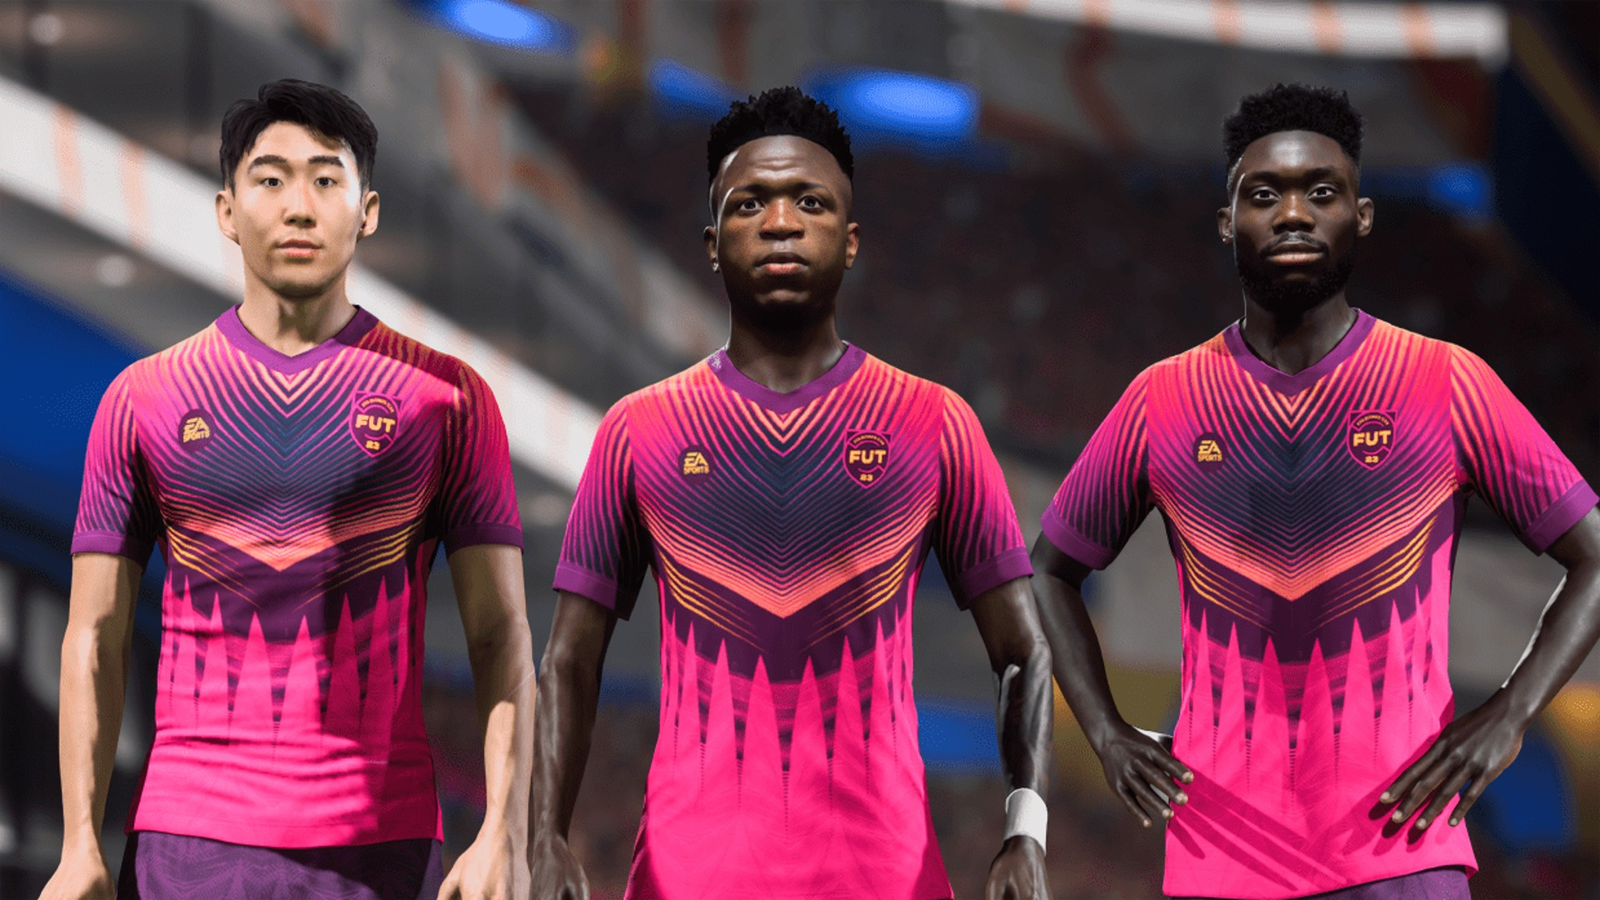 FIFA 23 guide: How to use the Squad Builder feature in FIFA